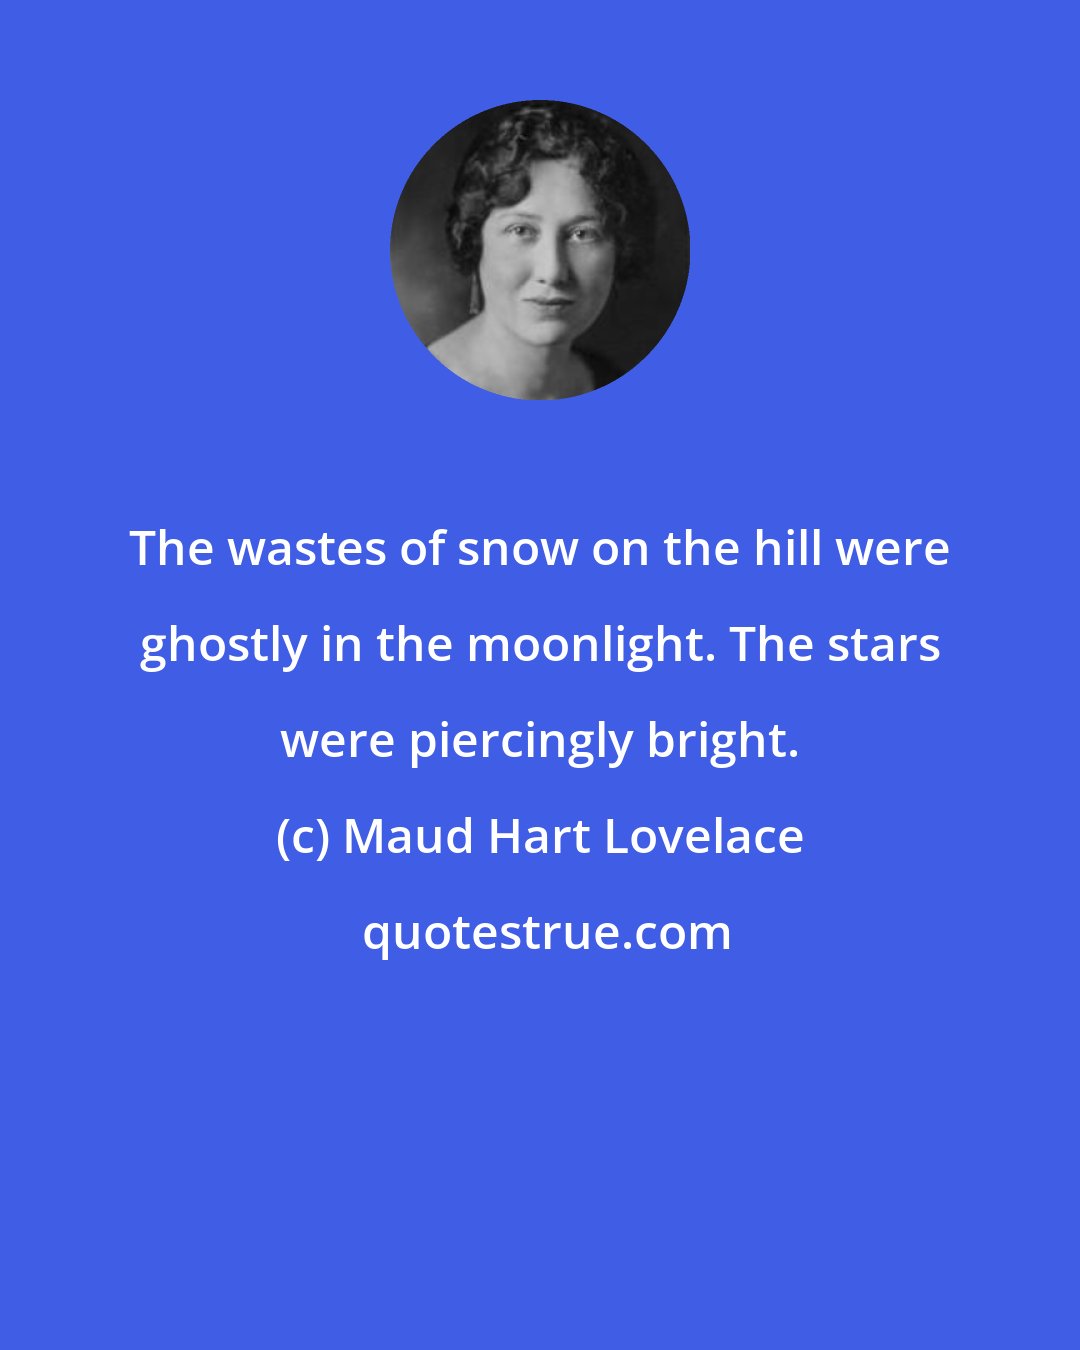 Maud Hart Lovelace: The wastes of snow on the hill were ghostly in the moonlight. The stars were piercingly bright.